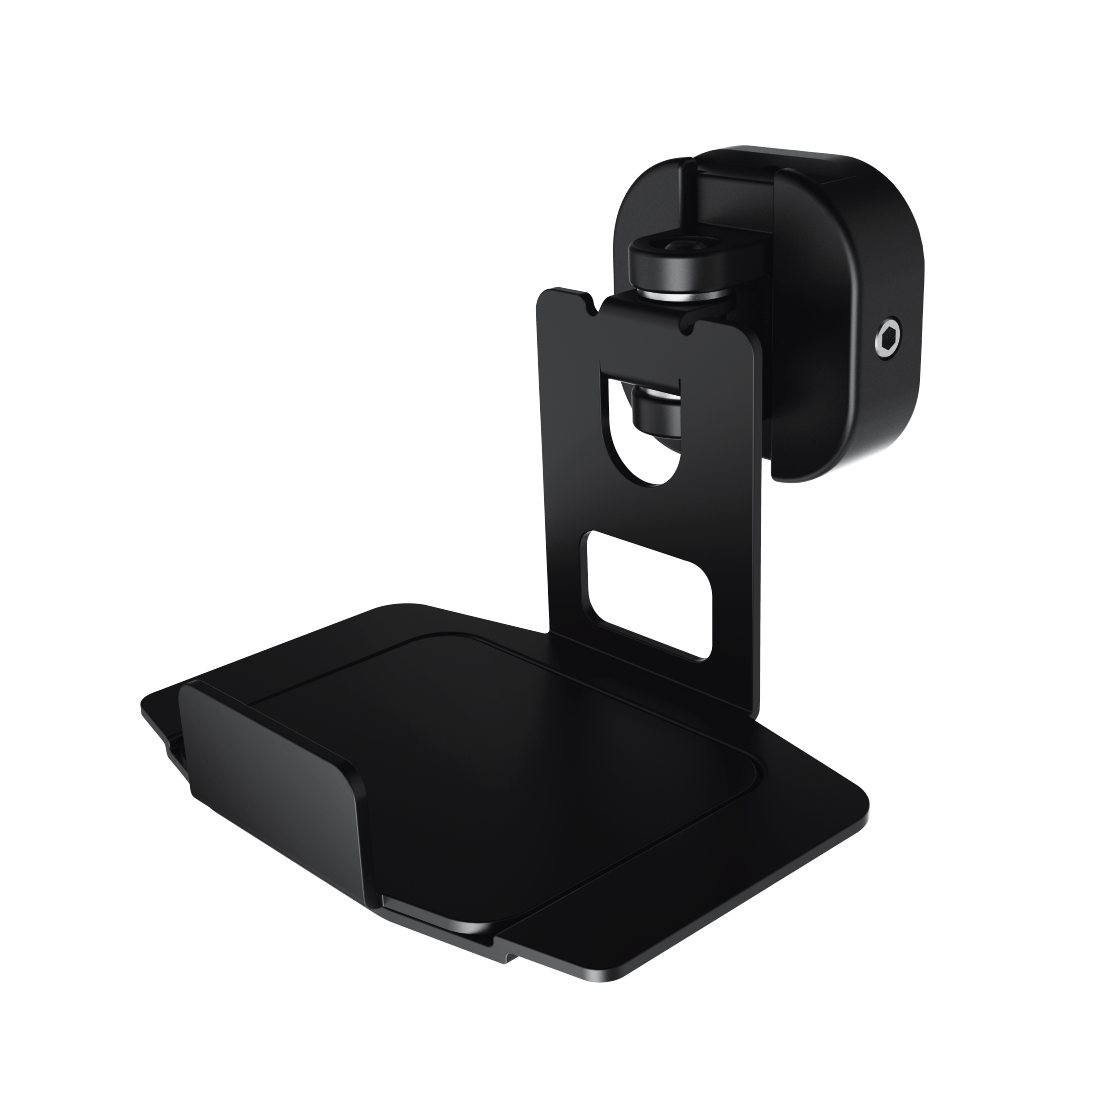 Hama Wall Holder for Bose Soundtouch 10/20, black